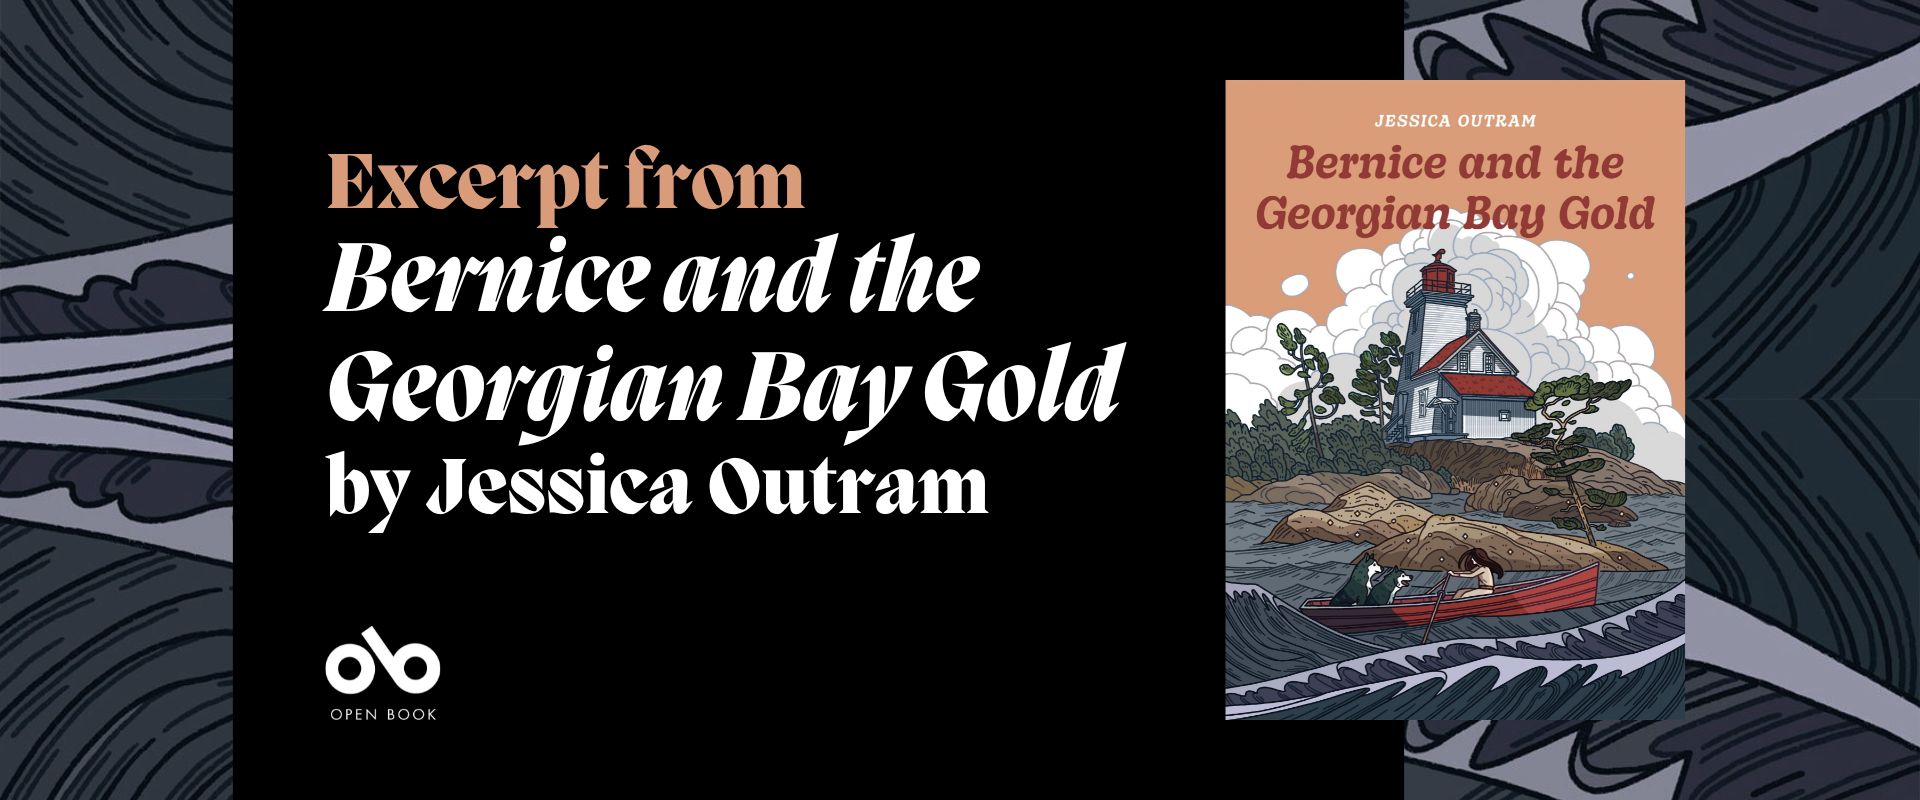 Grey and black banner image with the cover of Jessica Outram's Bernice and the Georgian Bay Gold and text reading "Excerpt from Bernice and the Georgian Bay Gold by Jessica Outram". Background on either side of the image echoes the background used on the cover of the book: the grey waters of a stormy bay